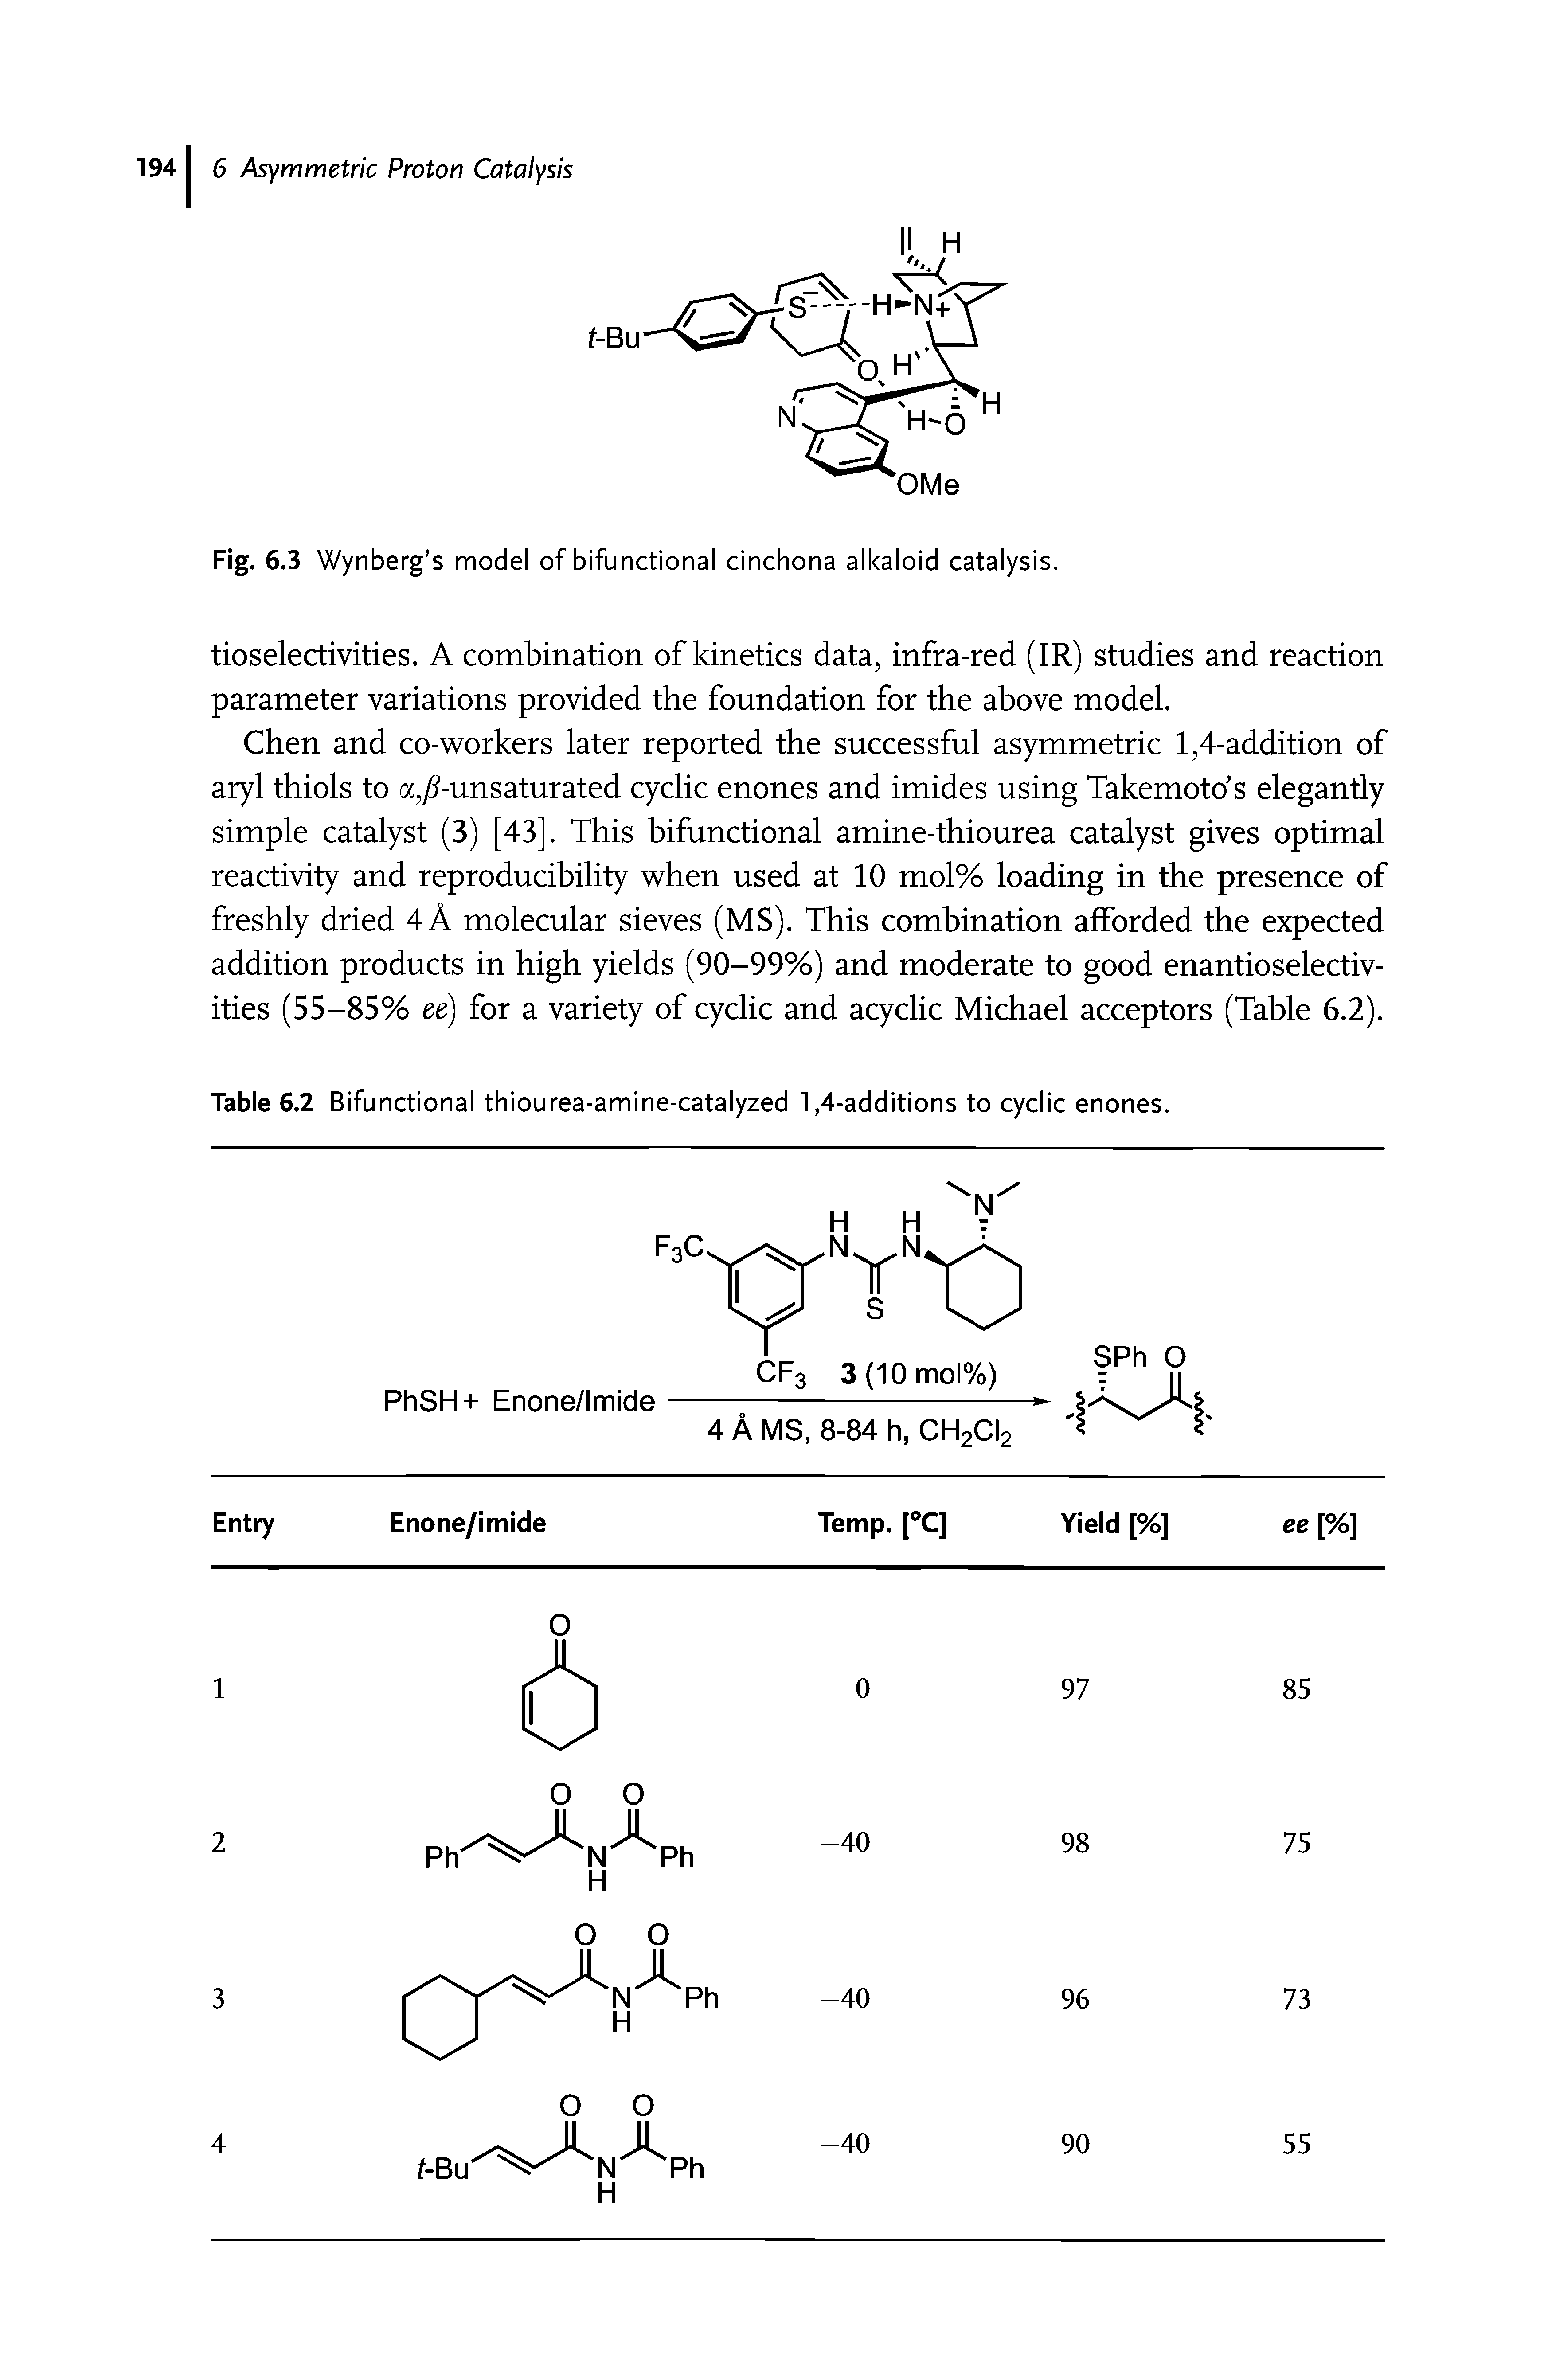 Table 6.2 Bifunctional thiourea-amine-catalyzed 1,4-additions to cyclic enones.